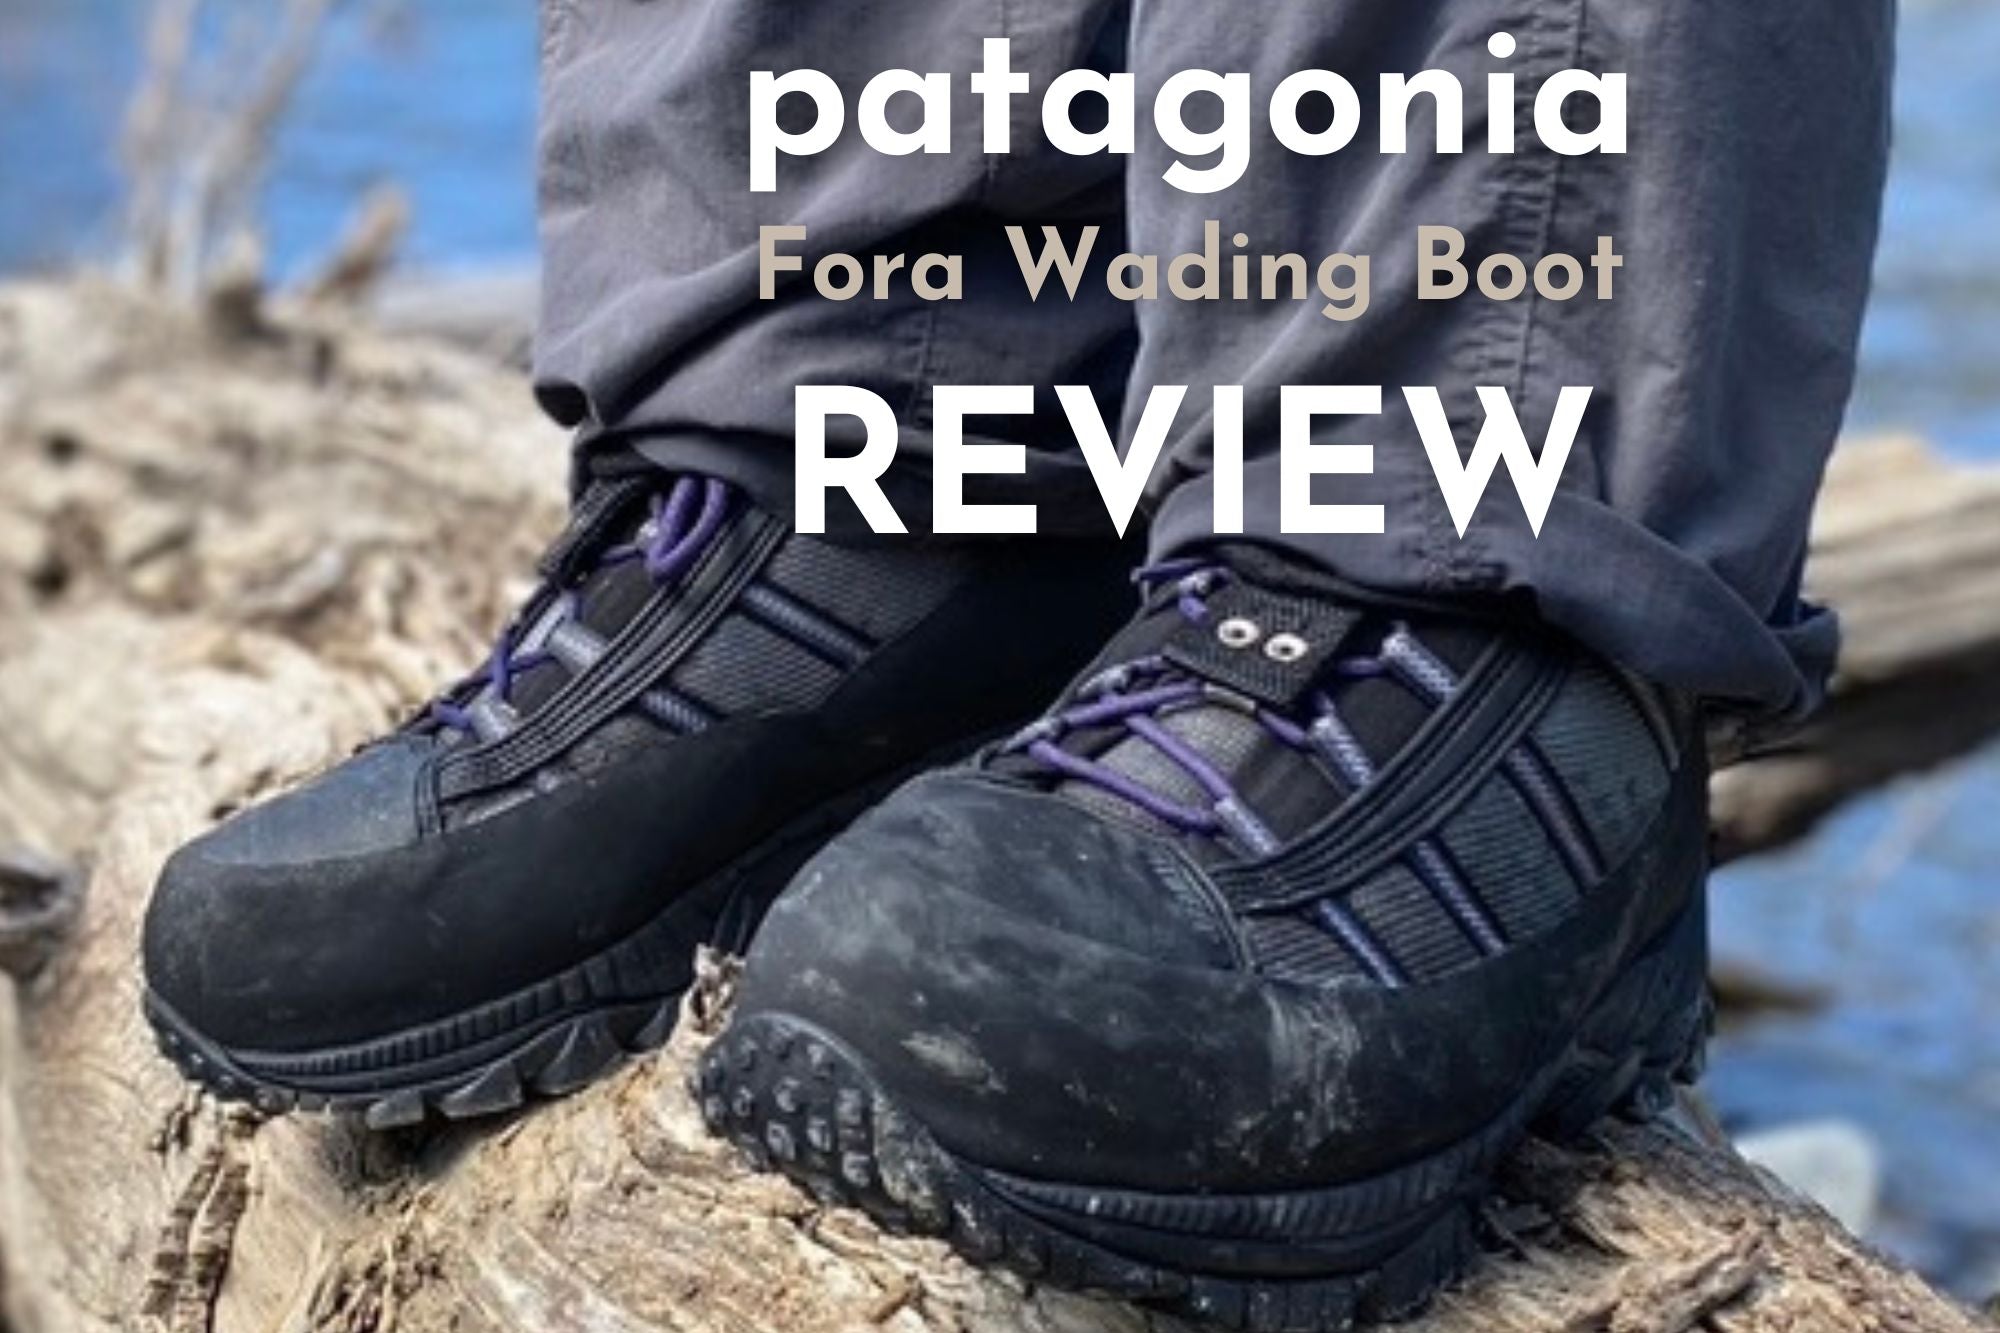 Product Review - New Patagonia Forra Wading Boot